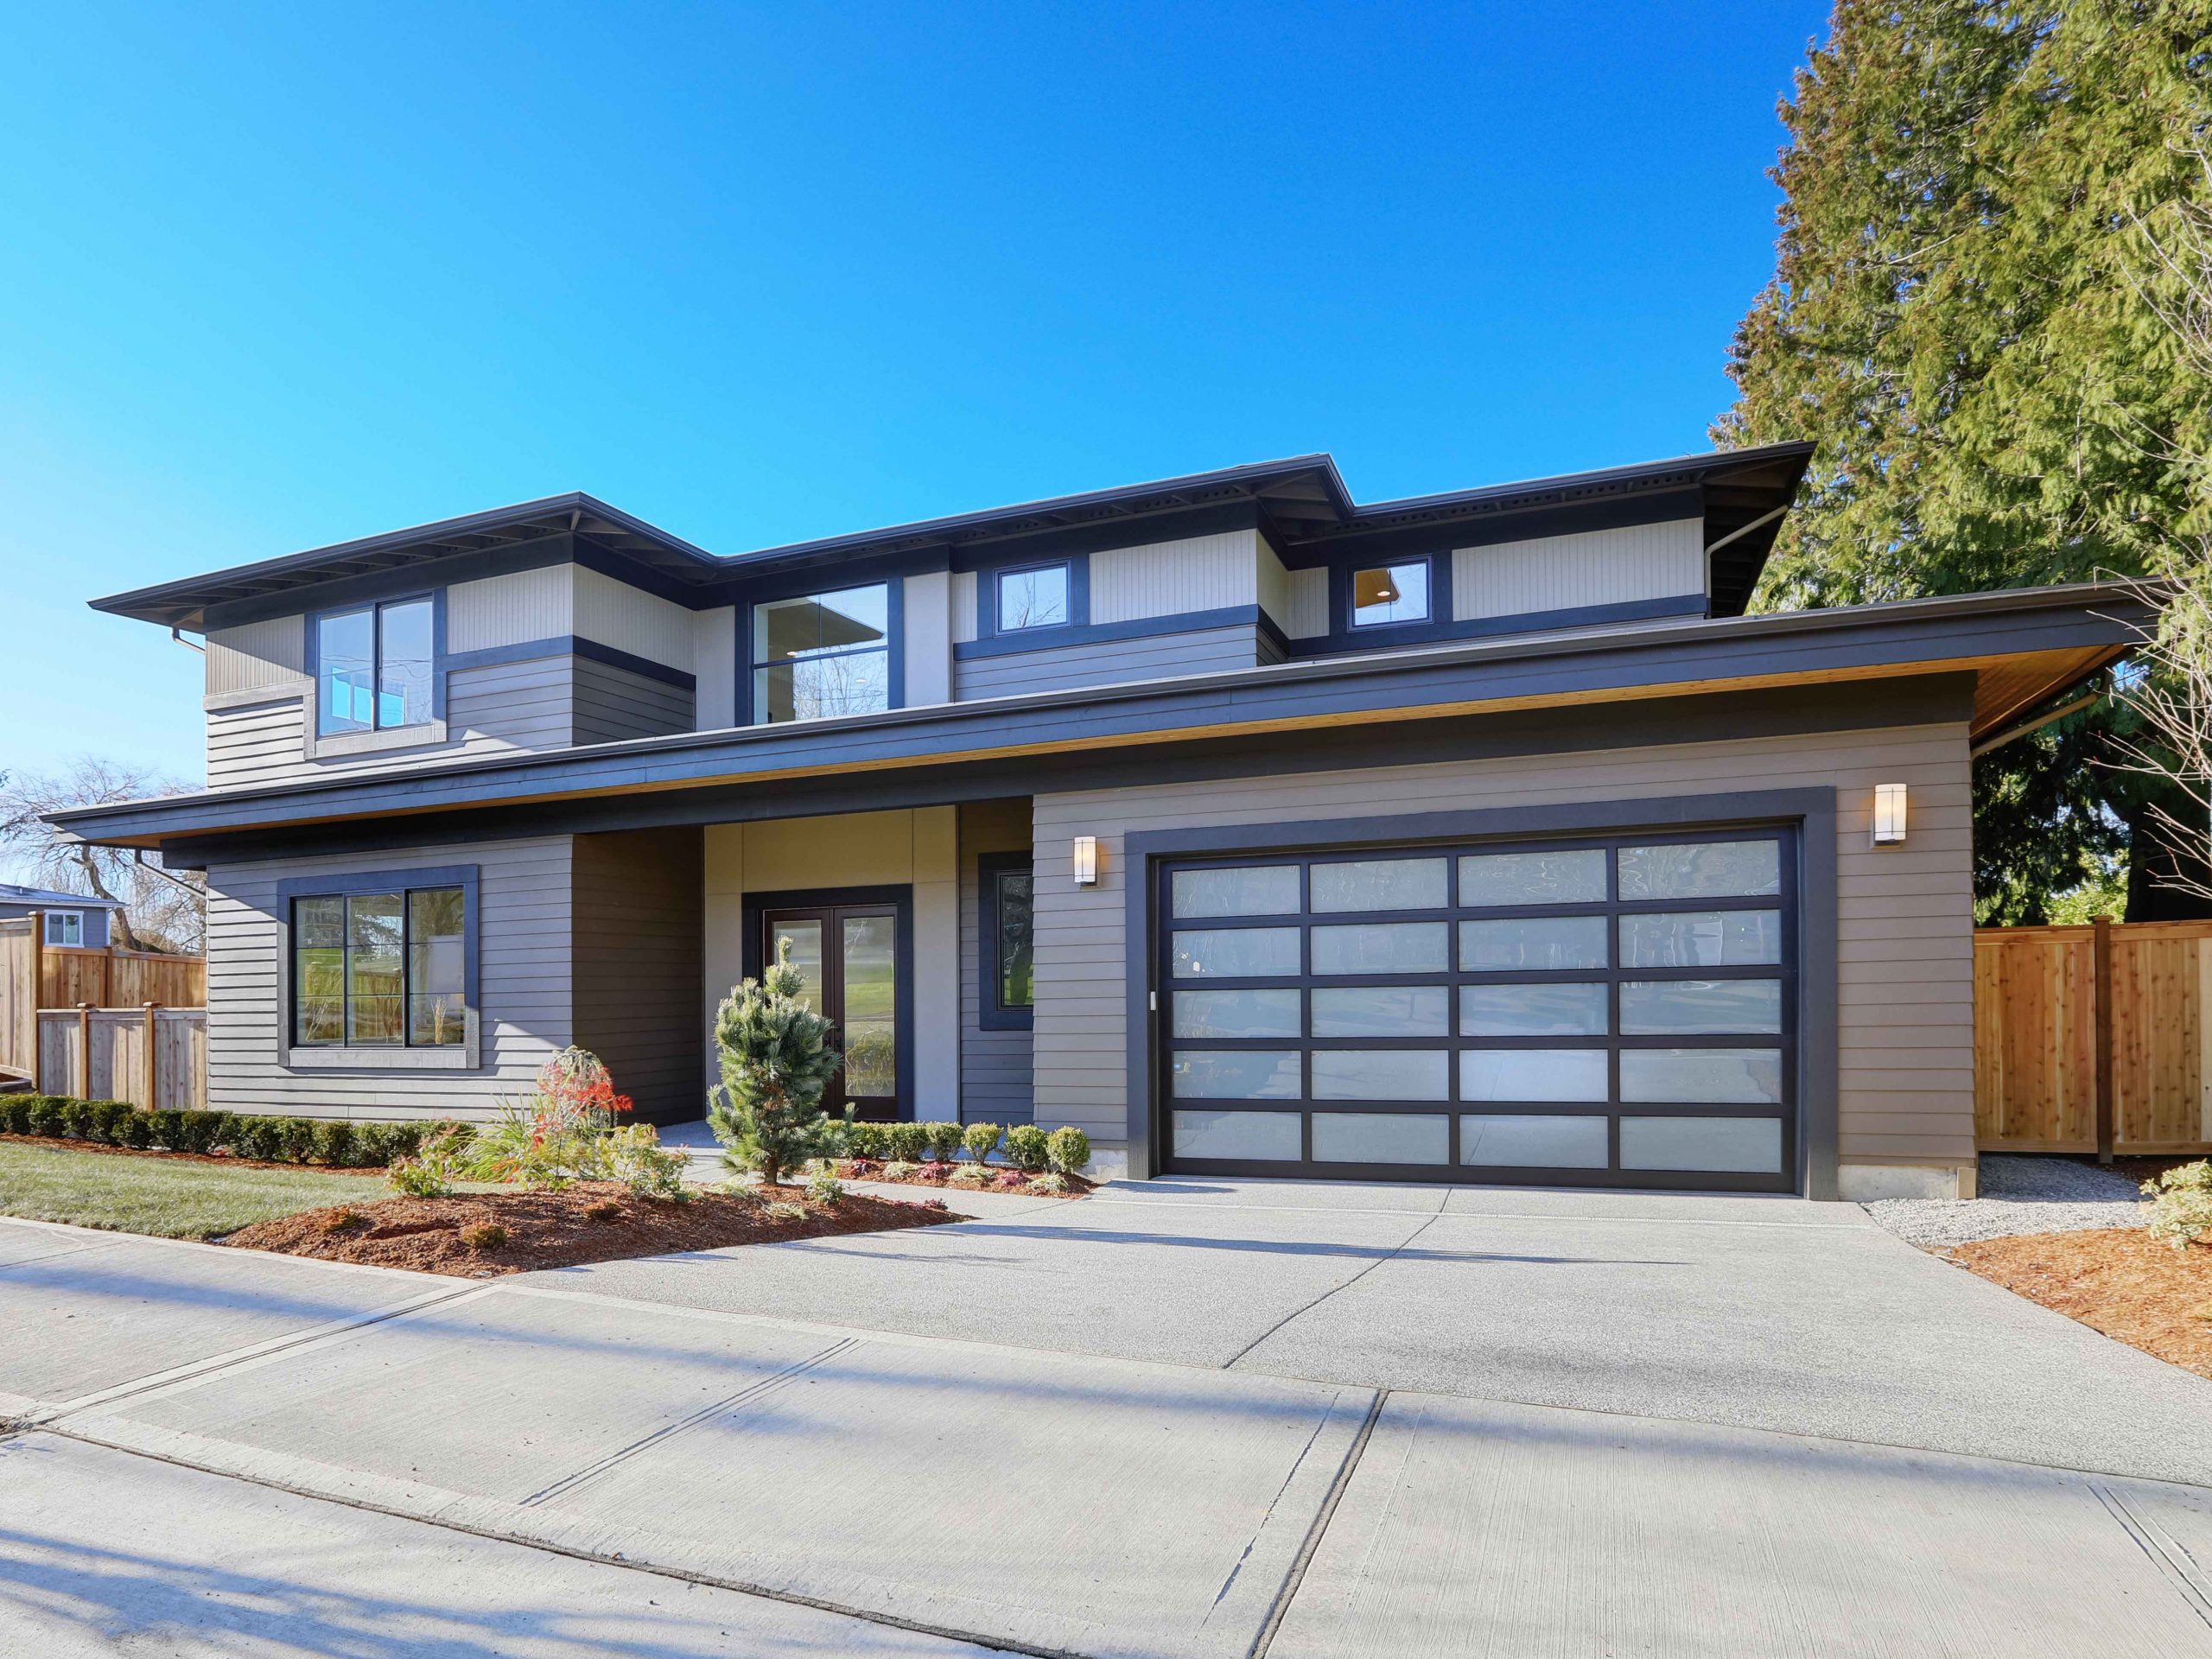 Find new construction or search for Modern and Contemporary New Homes For Sale in Colorado